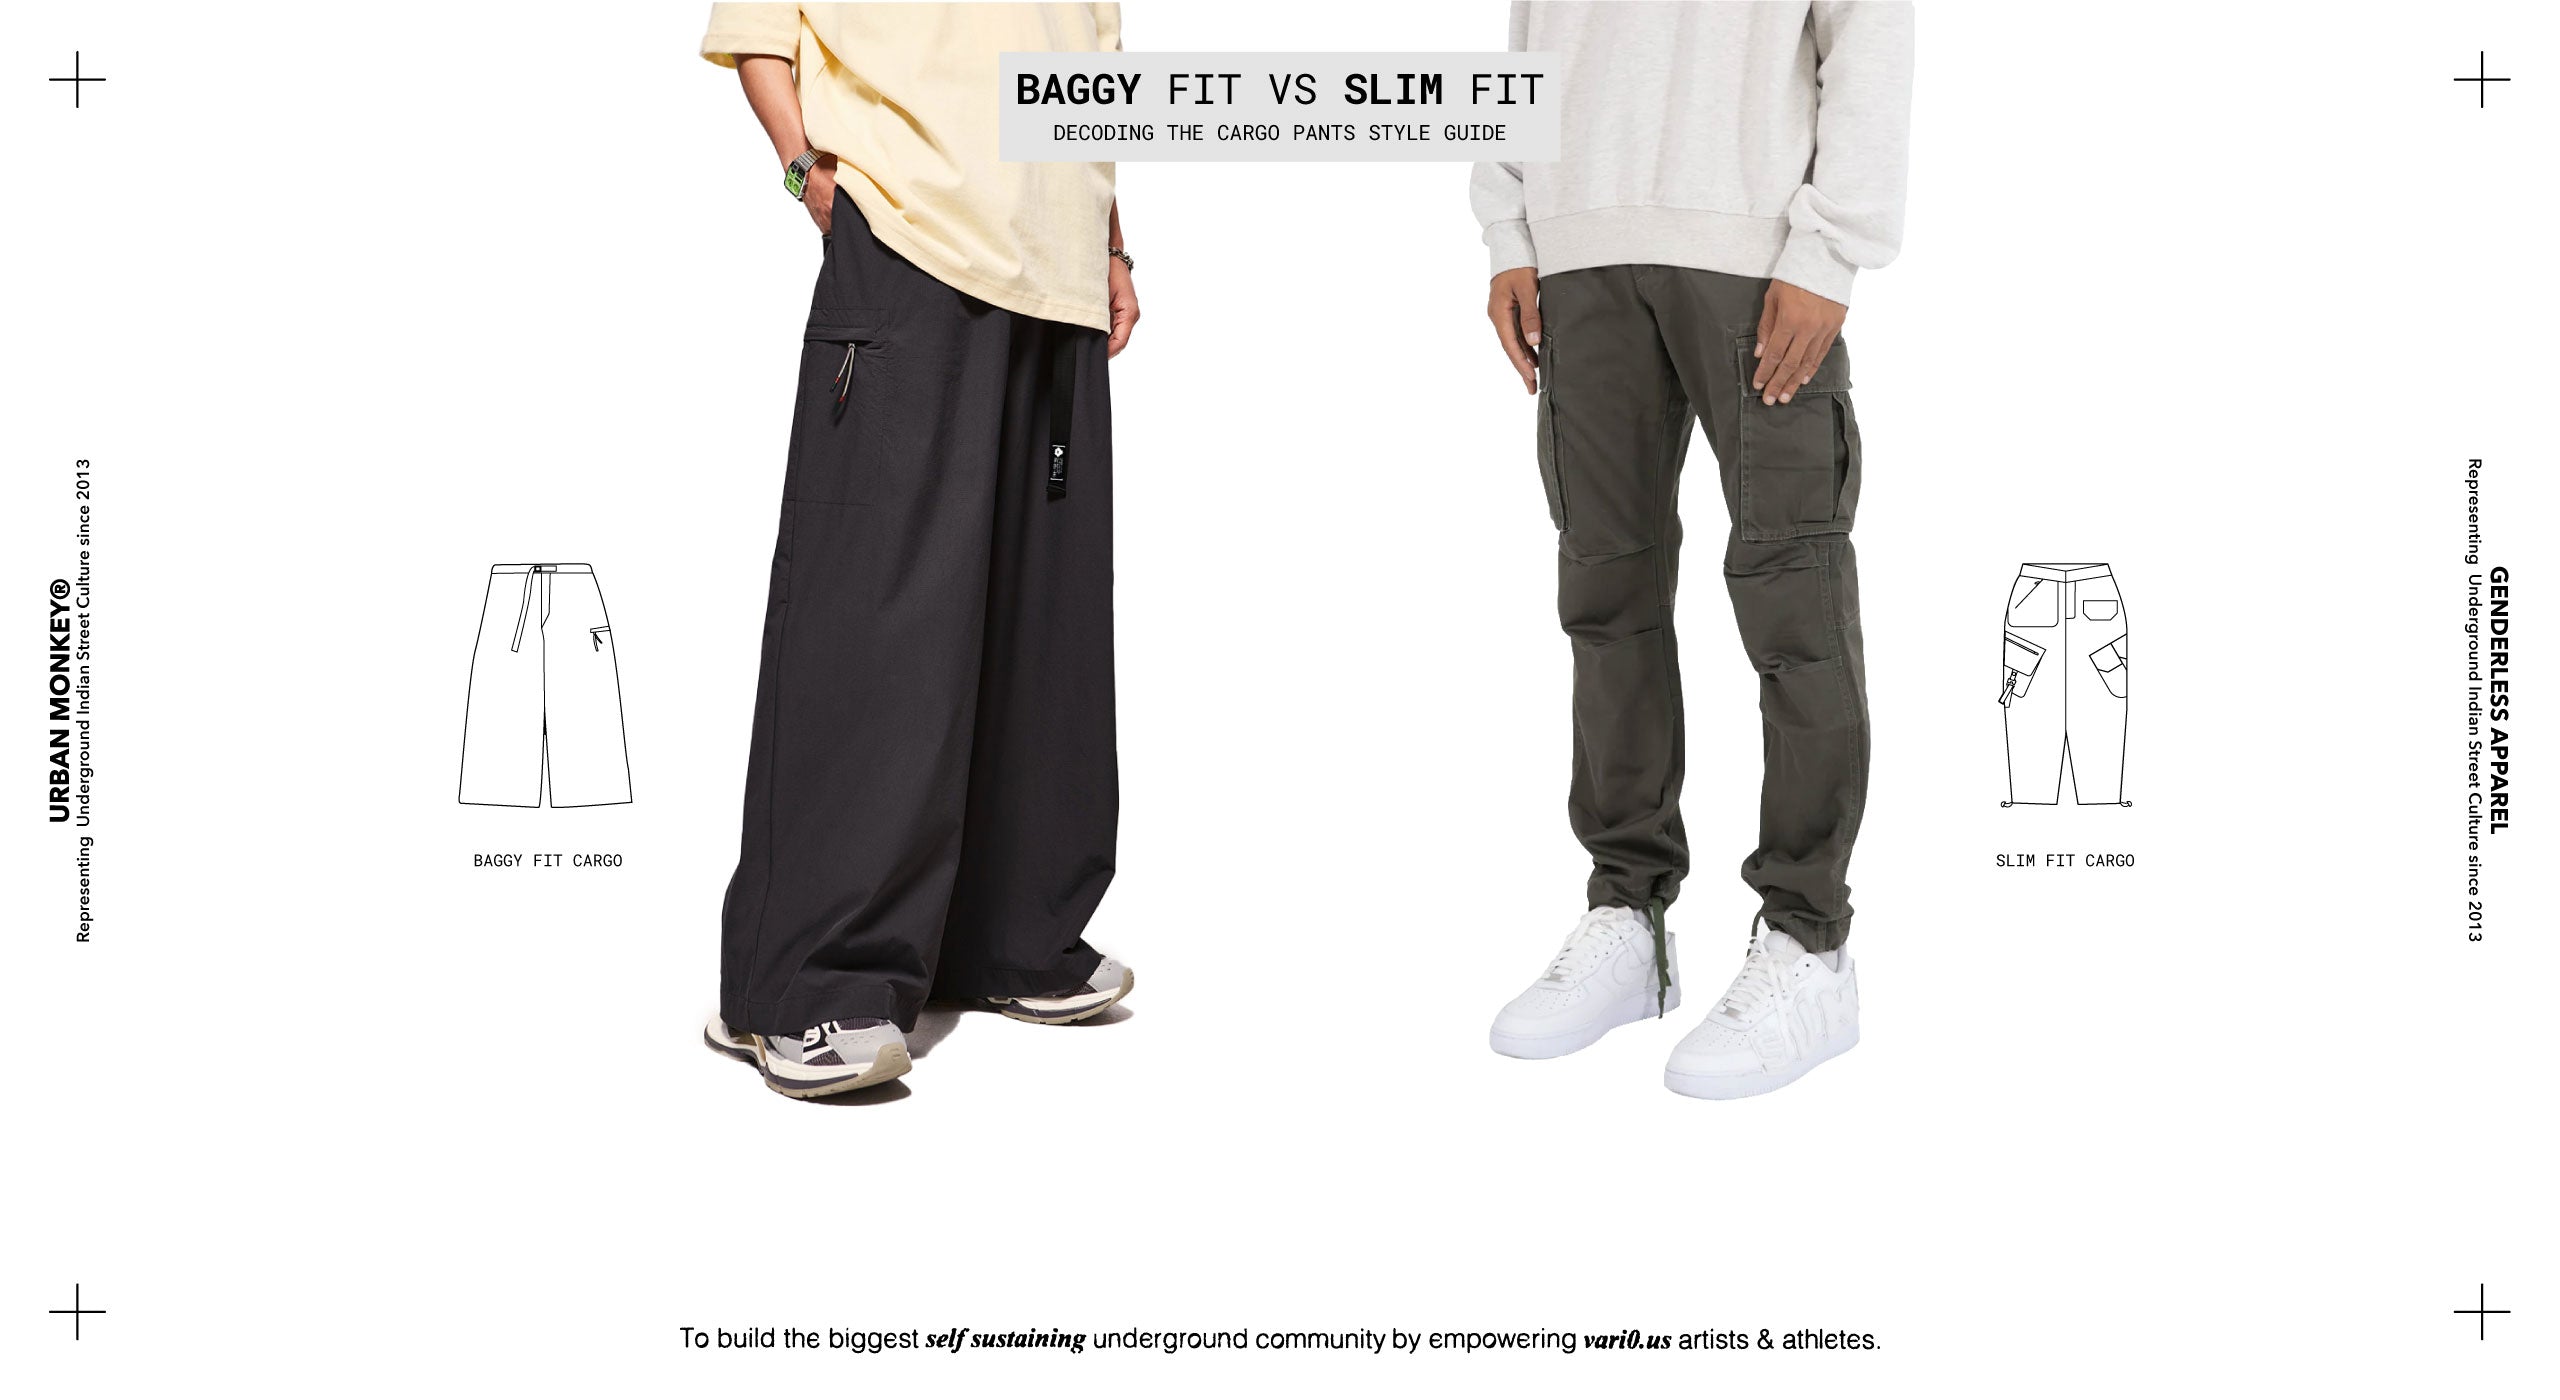 Cargo pants vs Baggy Jeans. Which one do you prefer? #cargopants #bagg